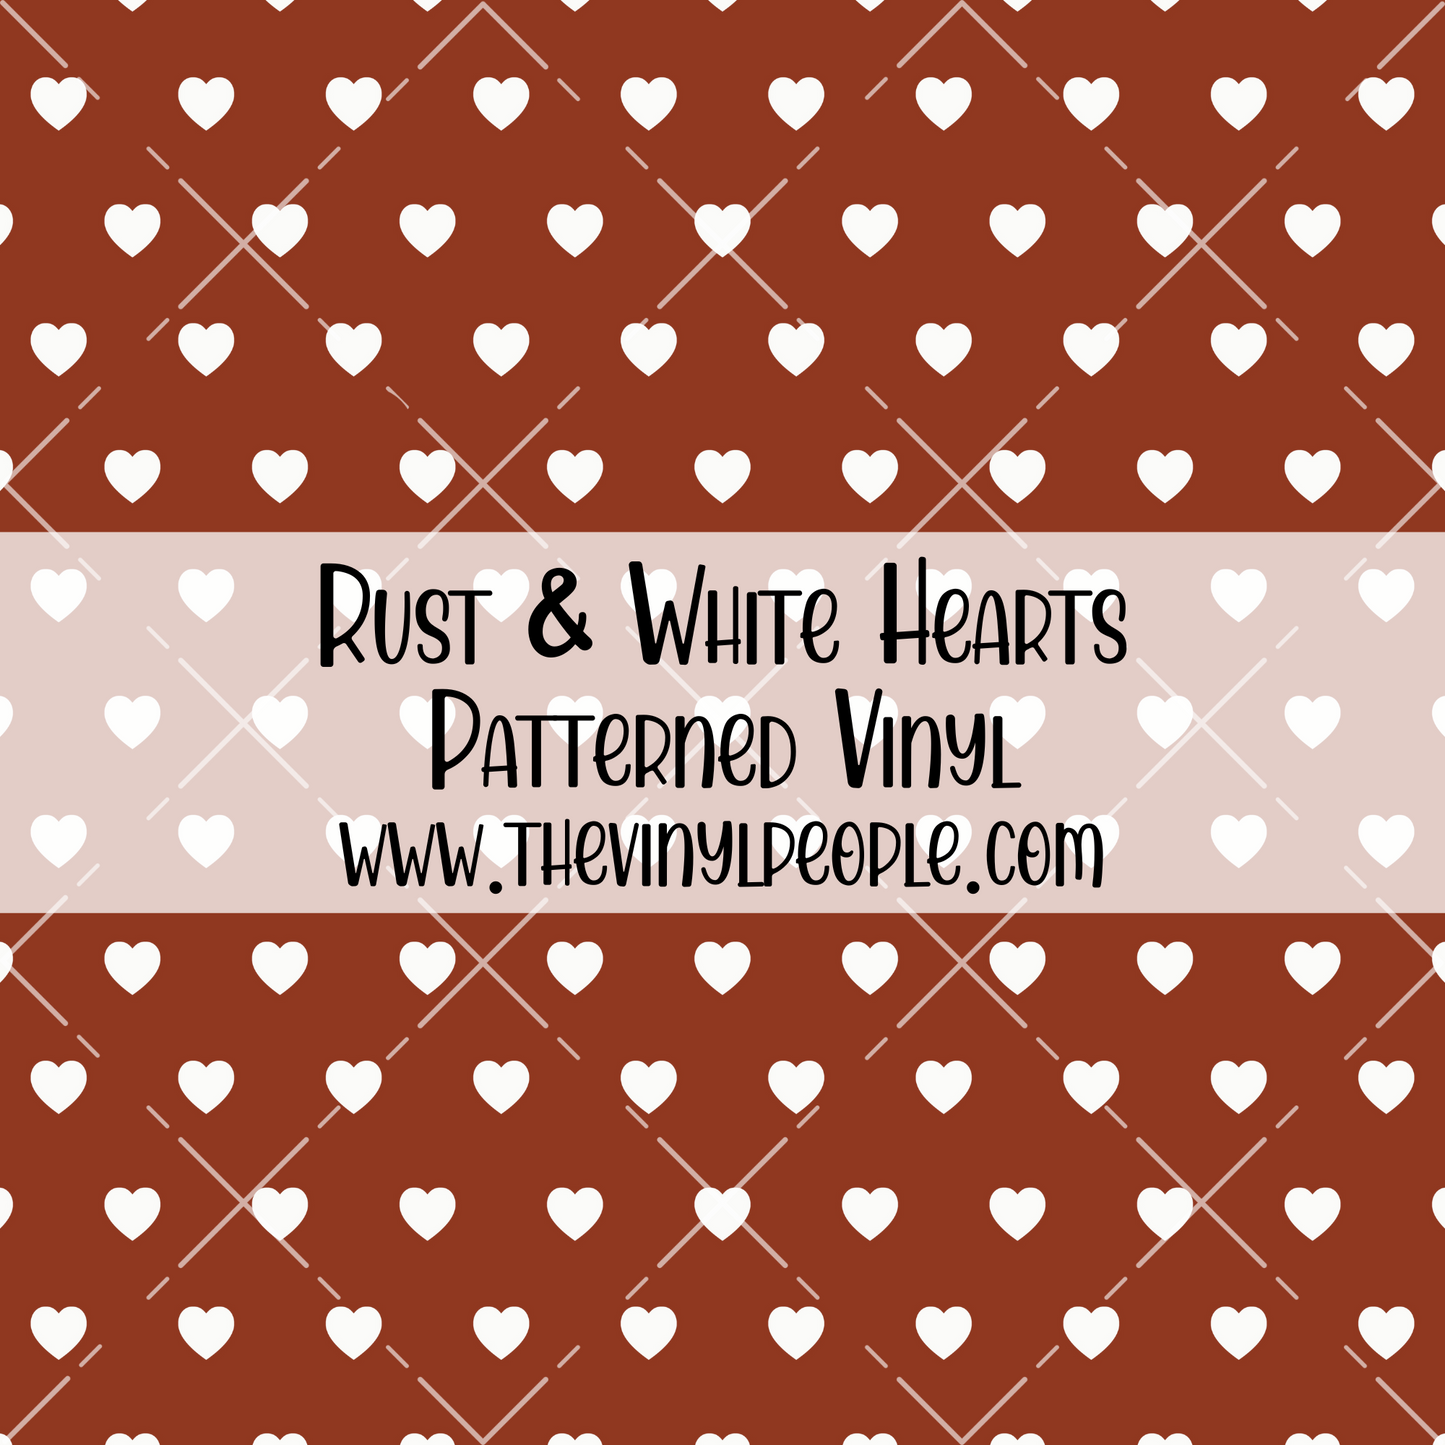 Rust & White Hearts Patterned Vinyl